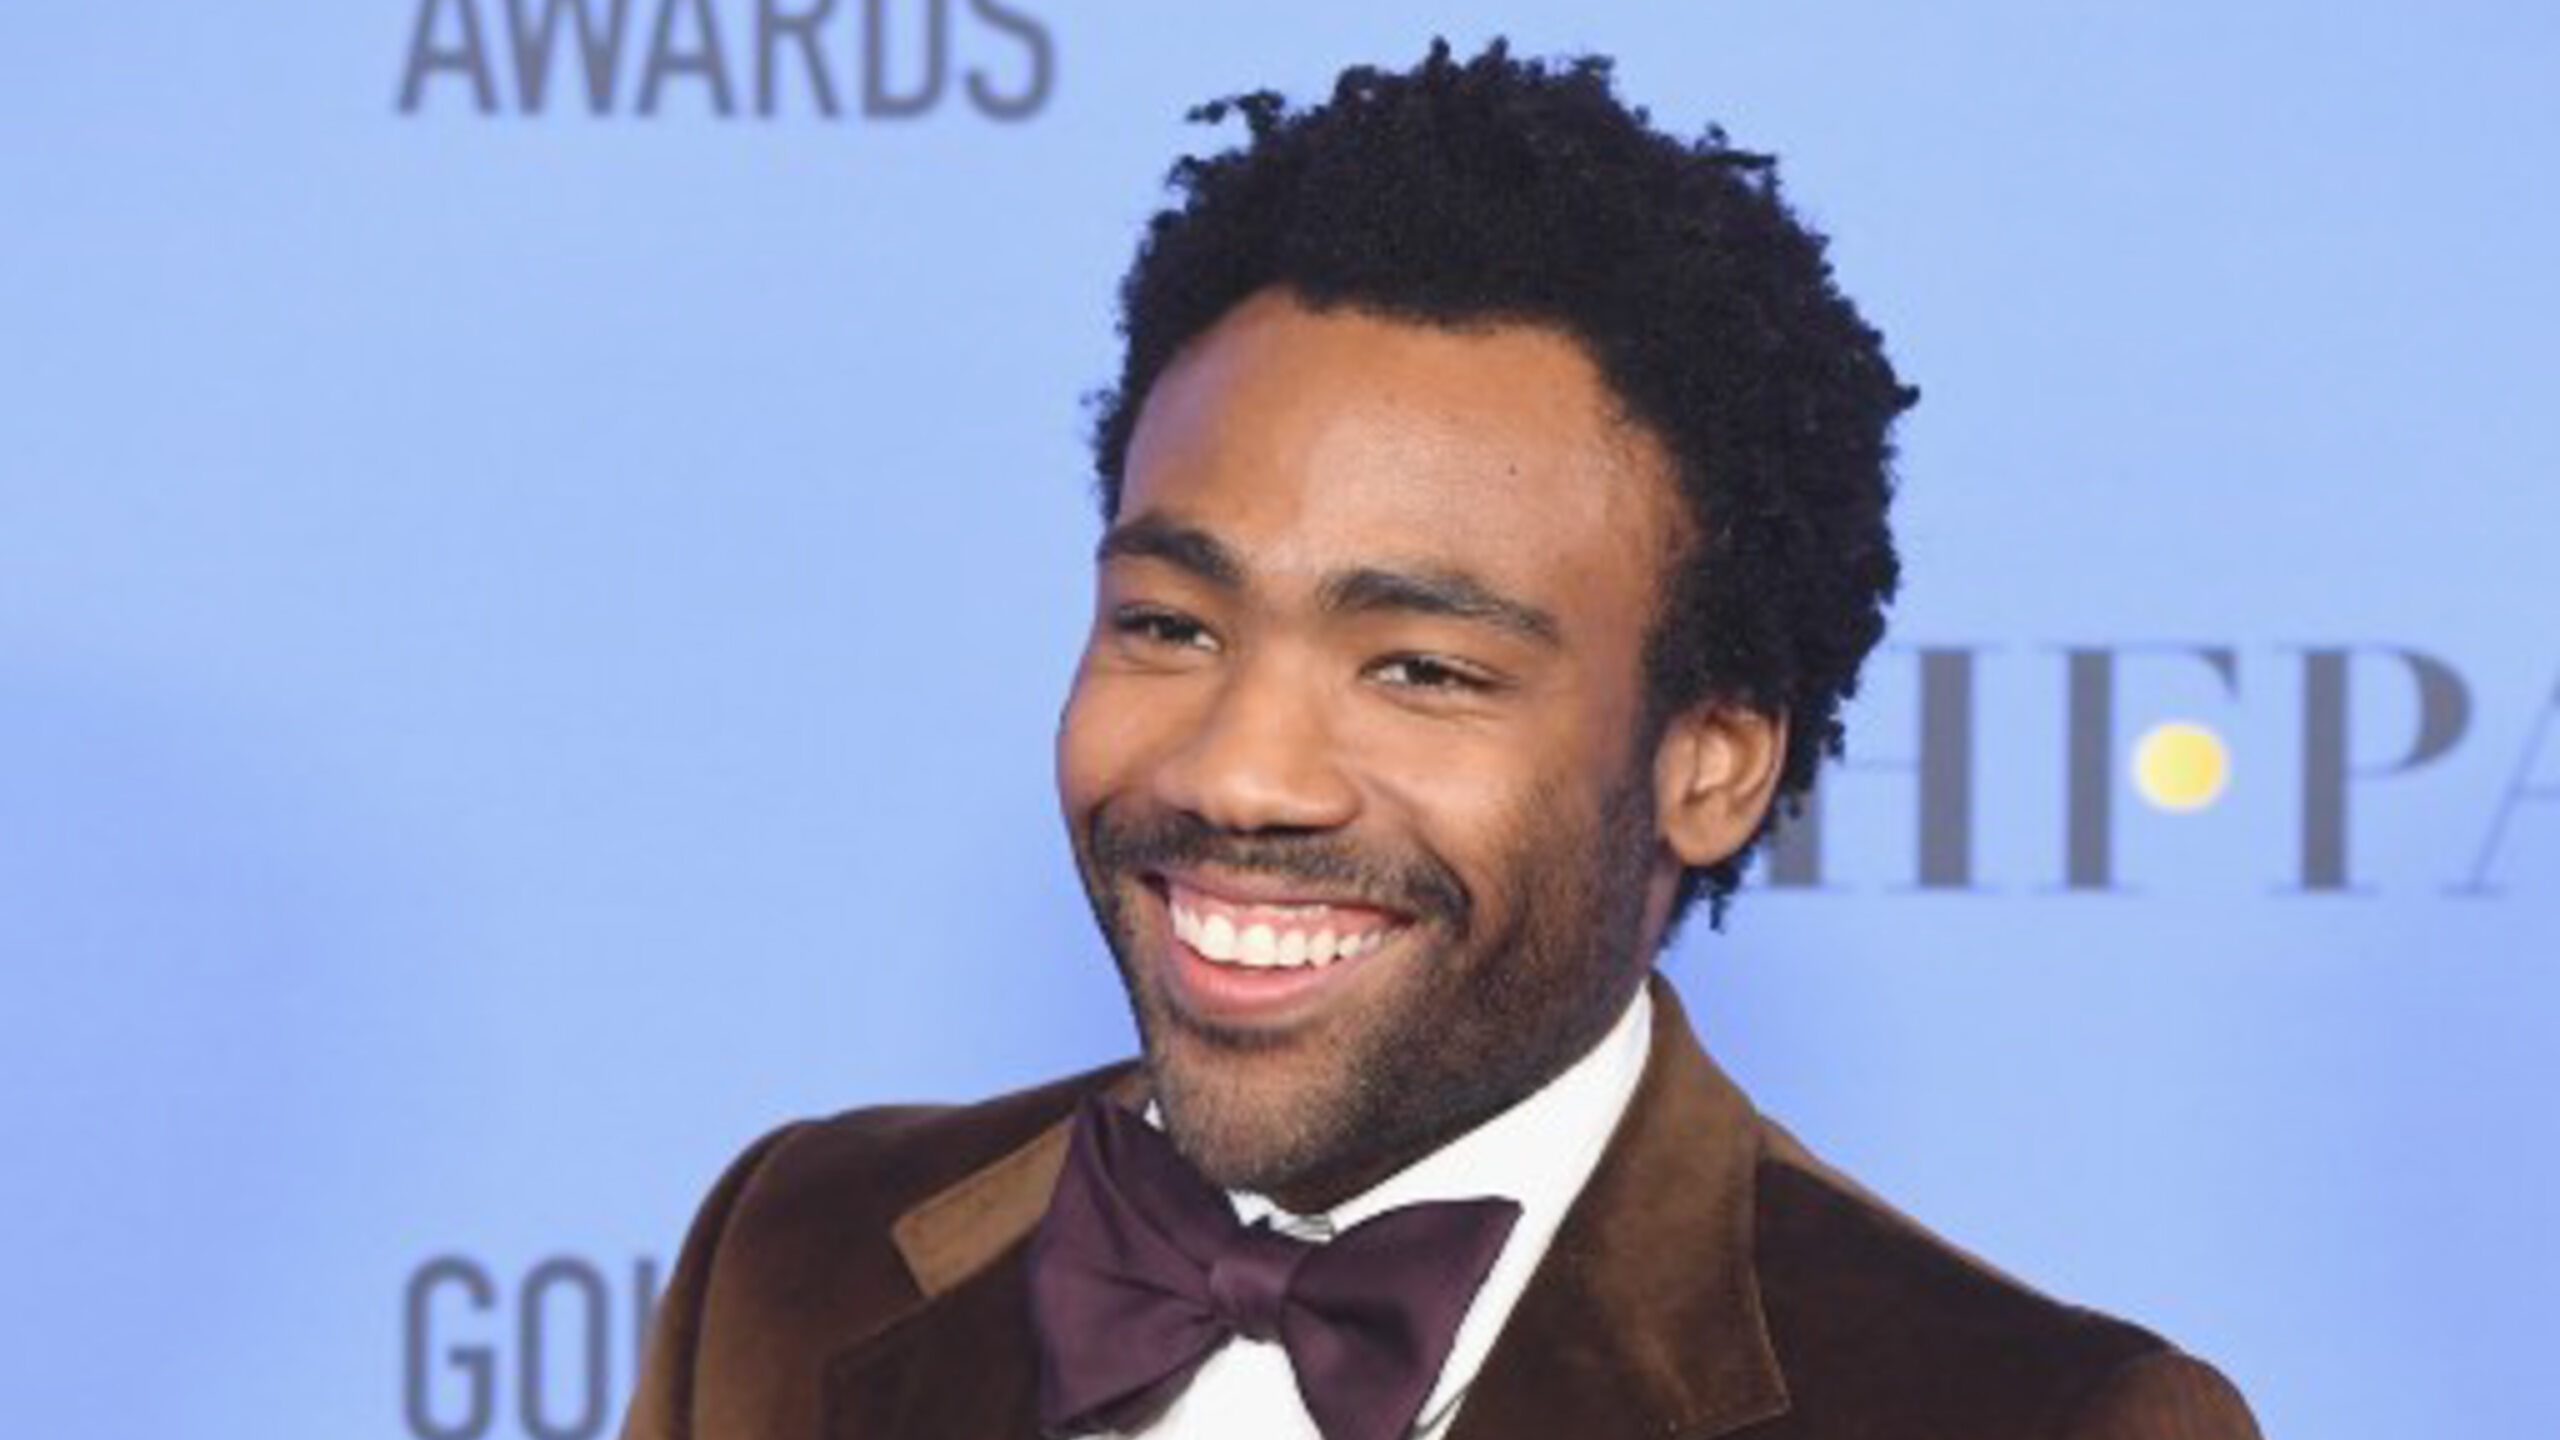 Donald Glover to play Simba in ‘Lion King’ live-action remake